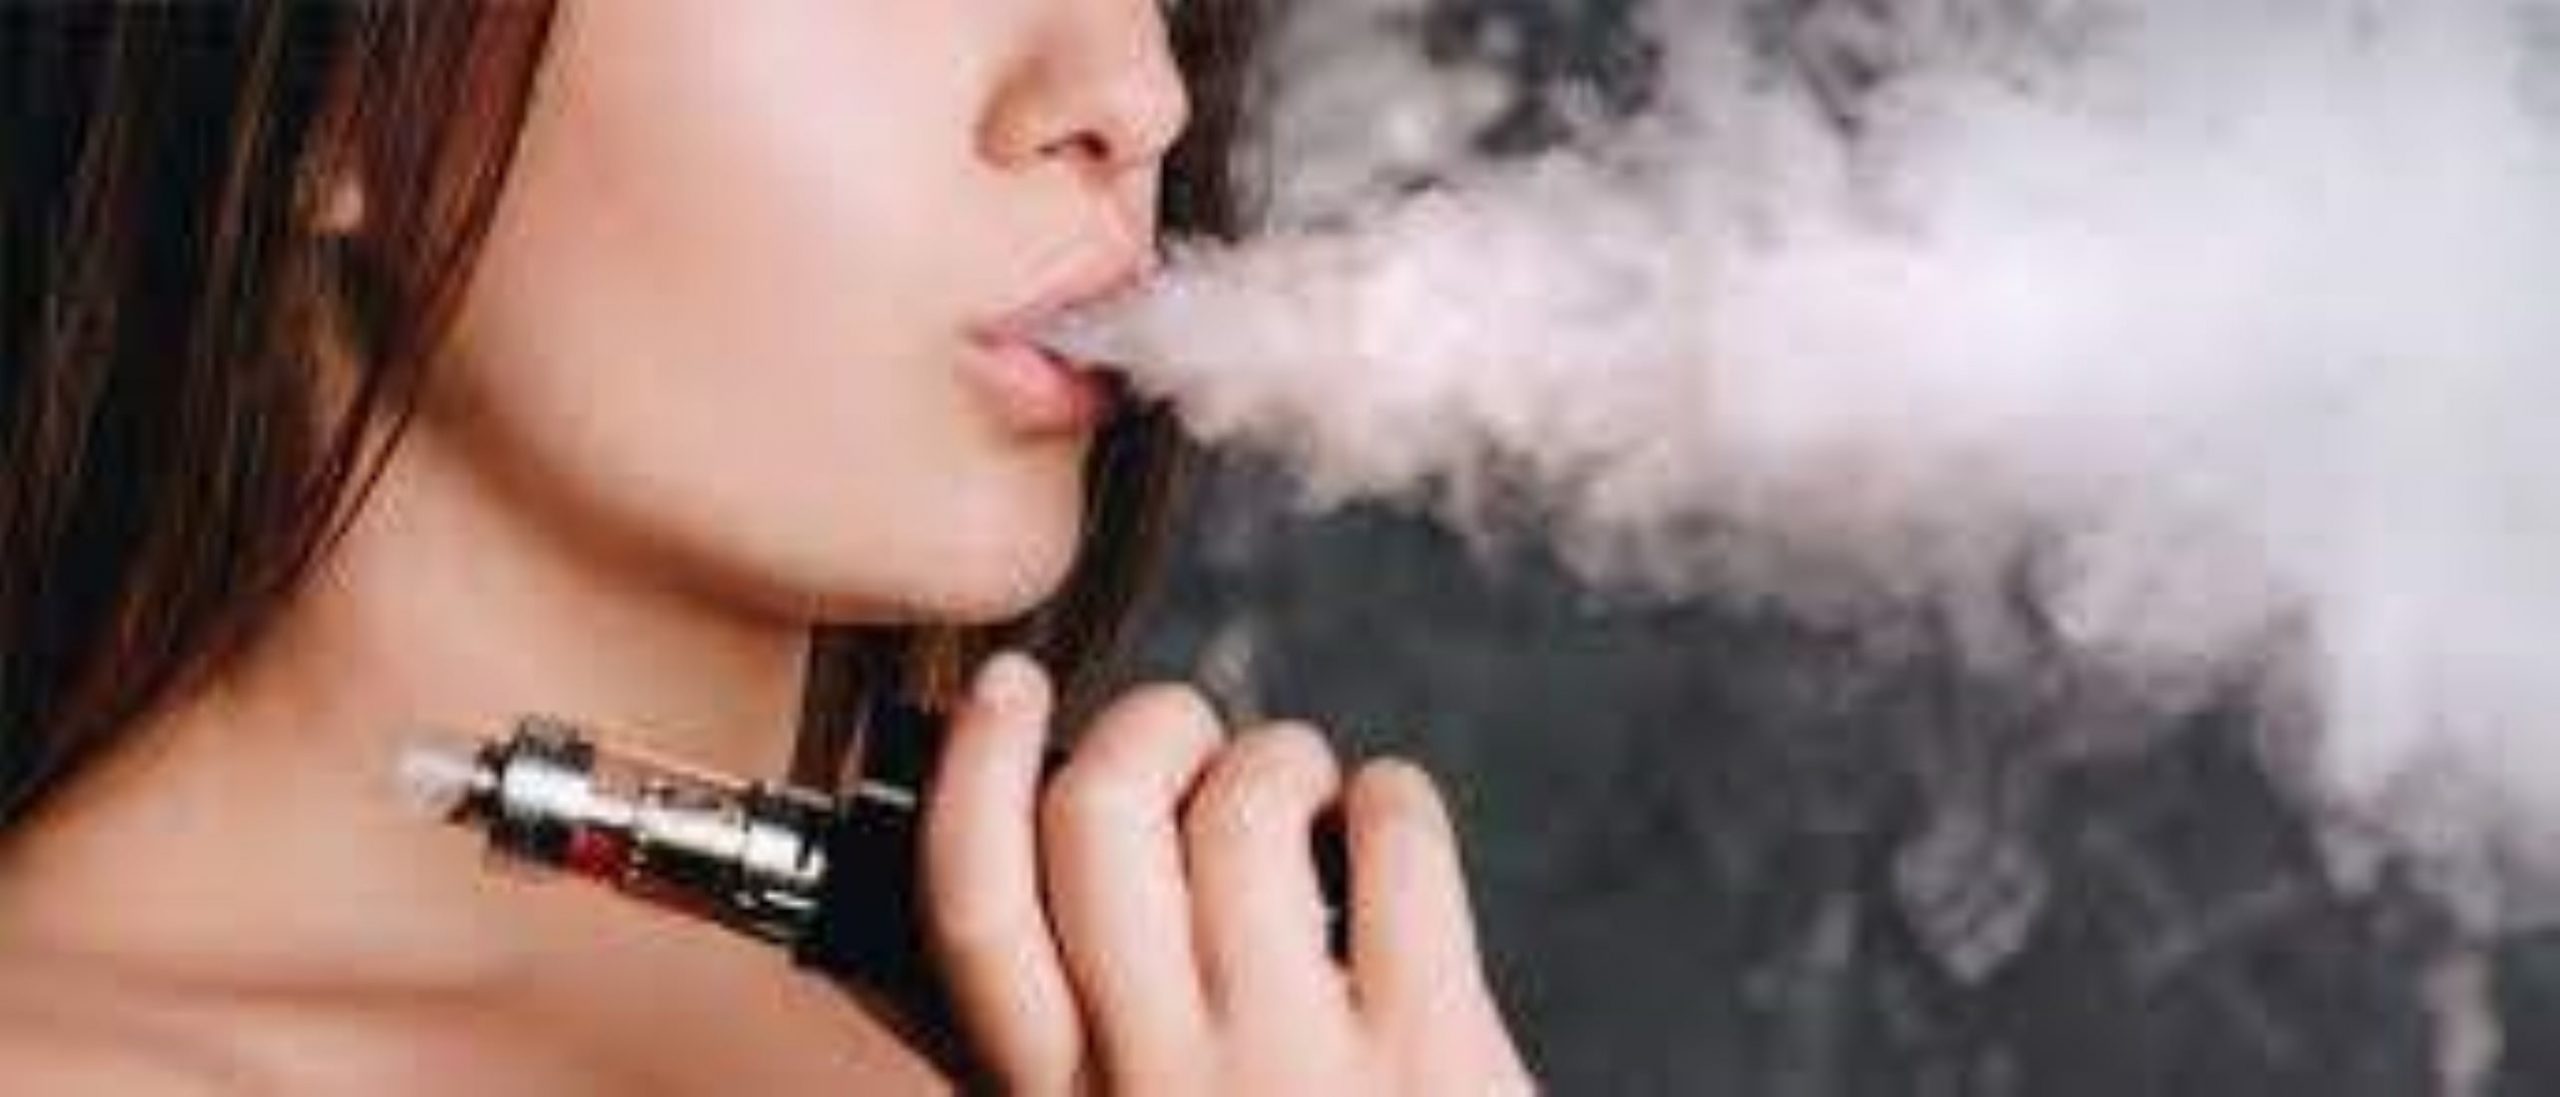 Australian Gov’t Takes Action To Reduce Smoking, Stamp Out Vaping